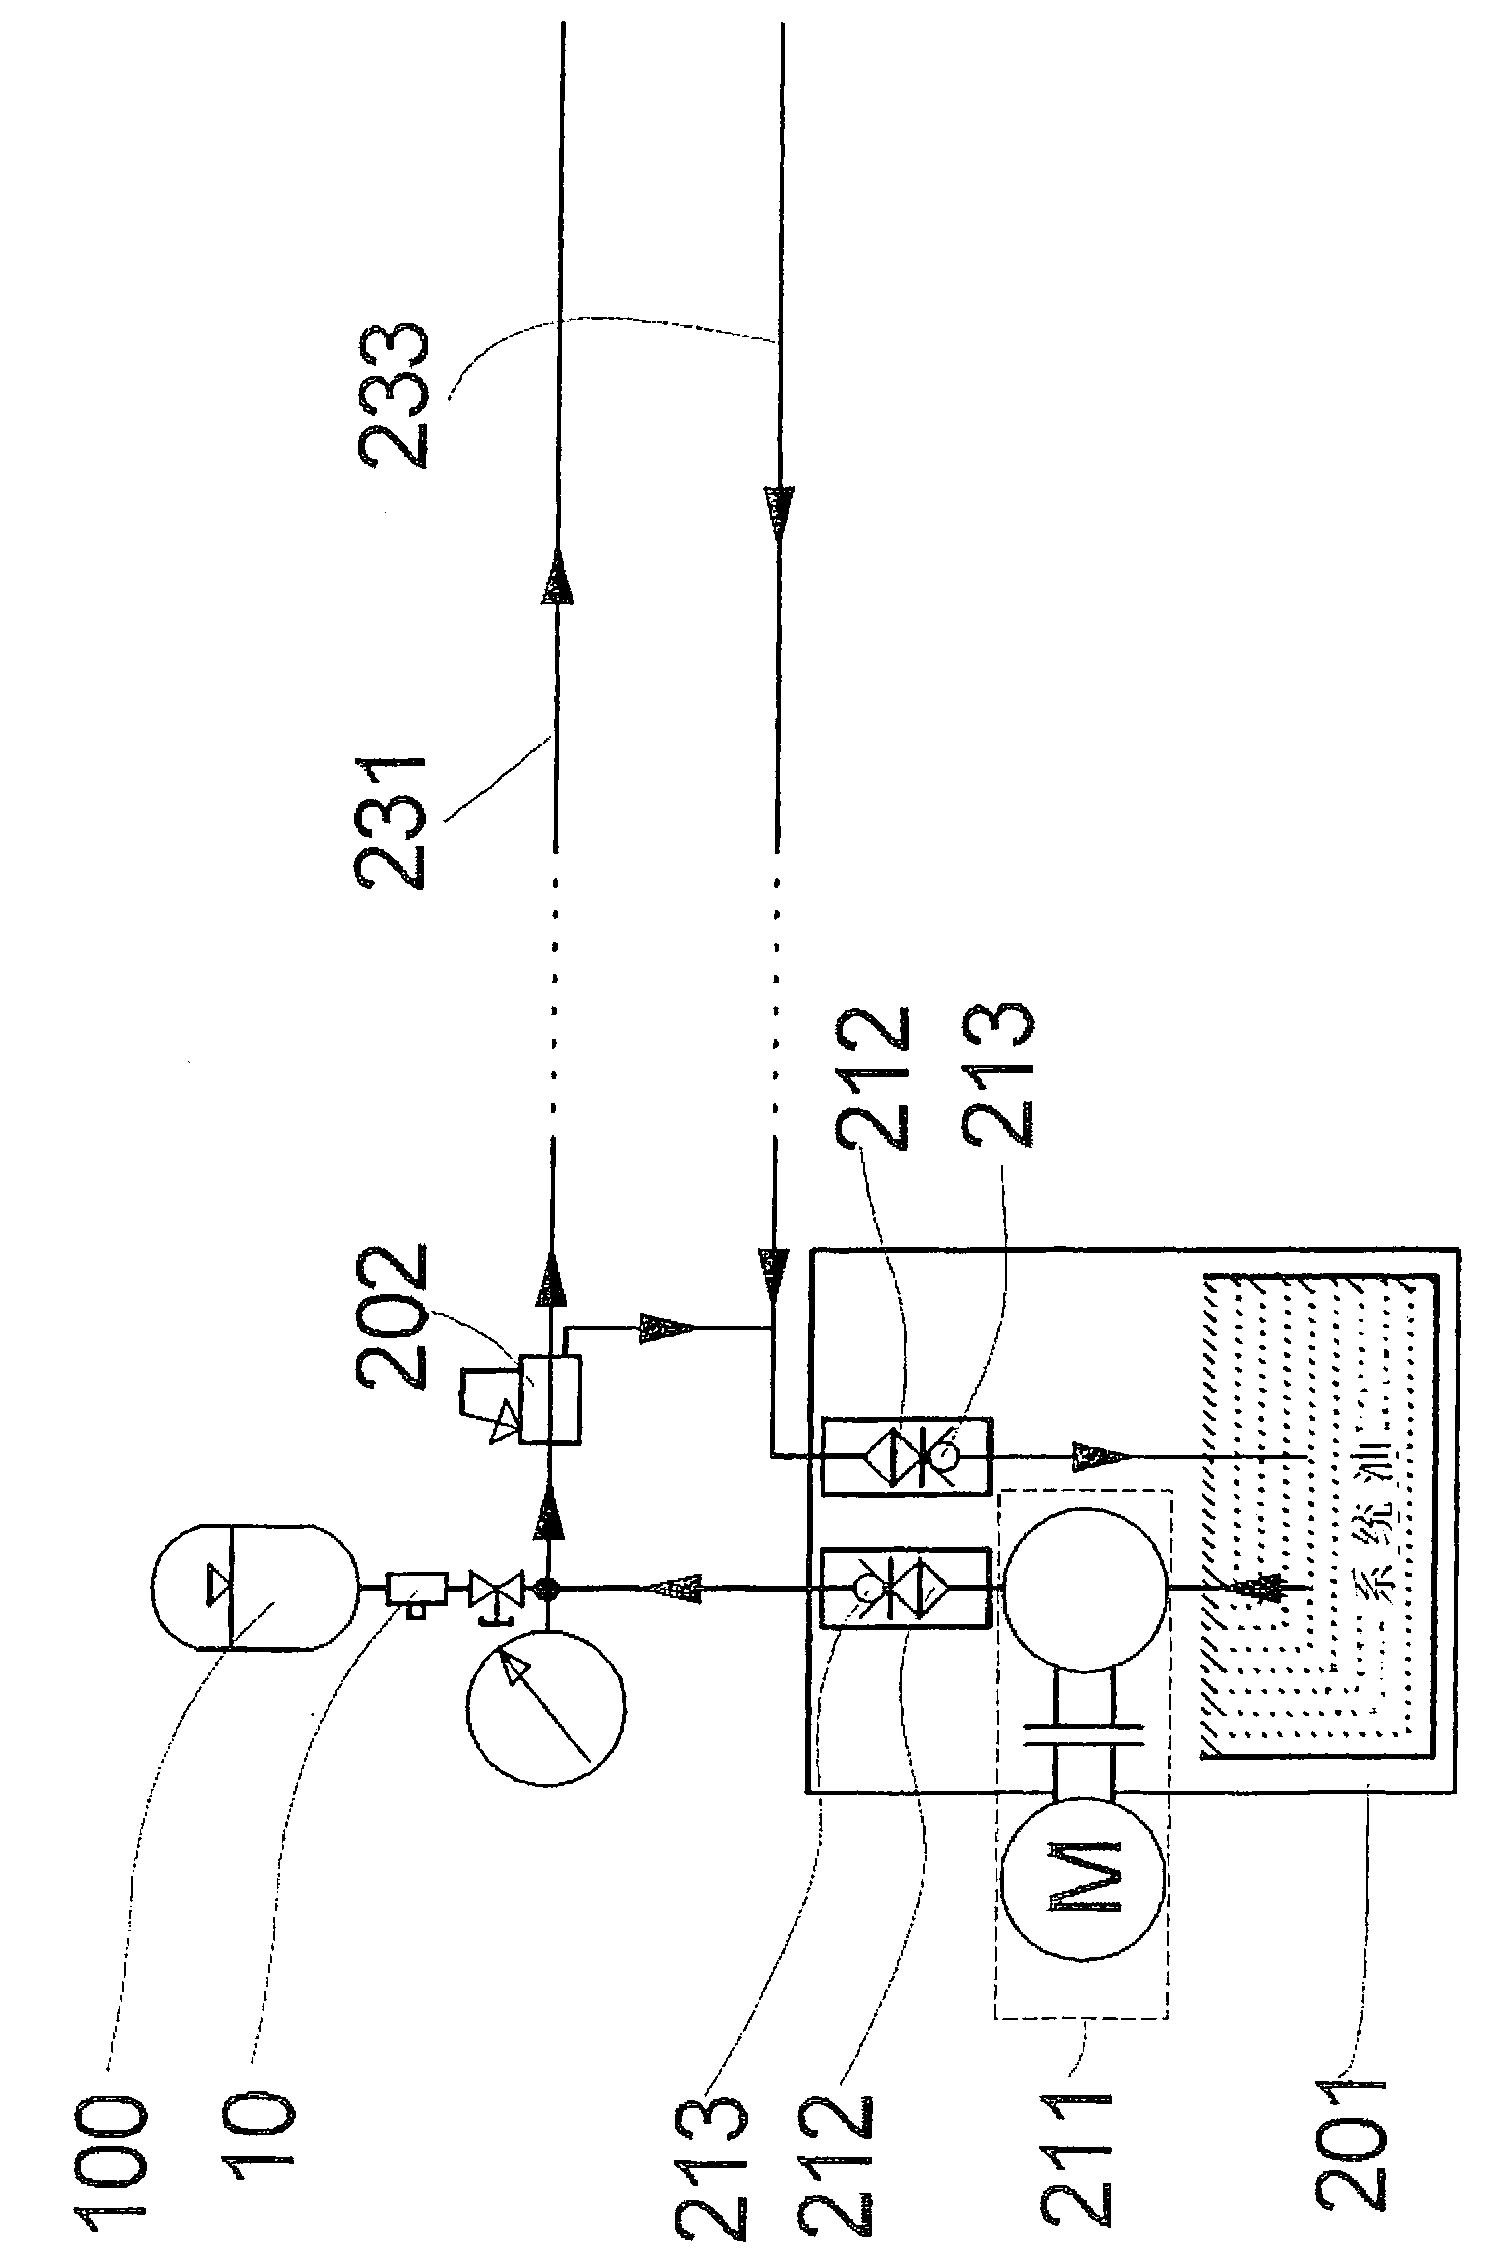 Hydraulic System For Central Lubrication Of Engine Cylinders